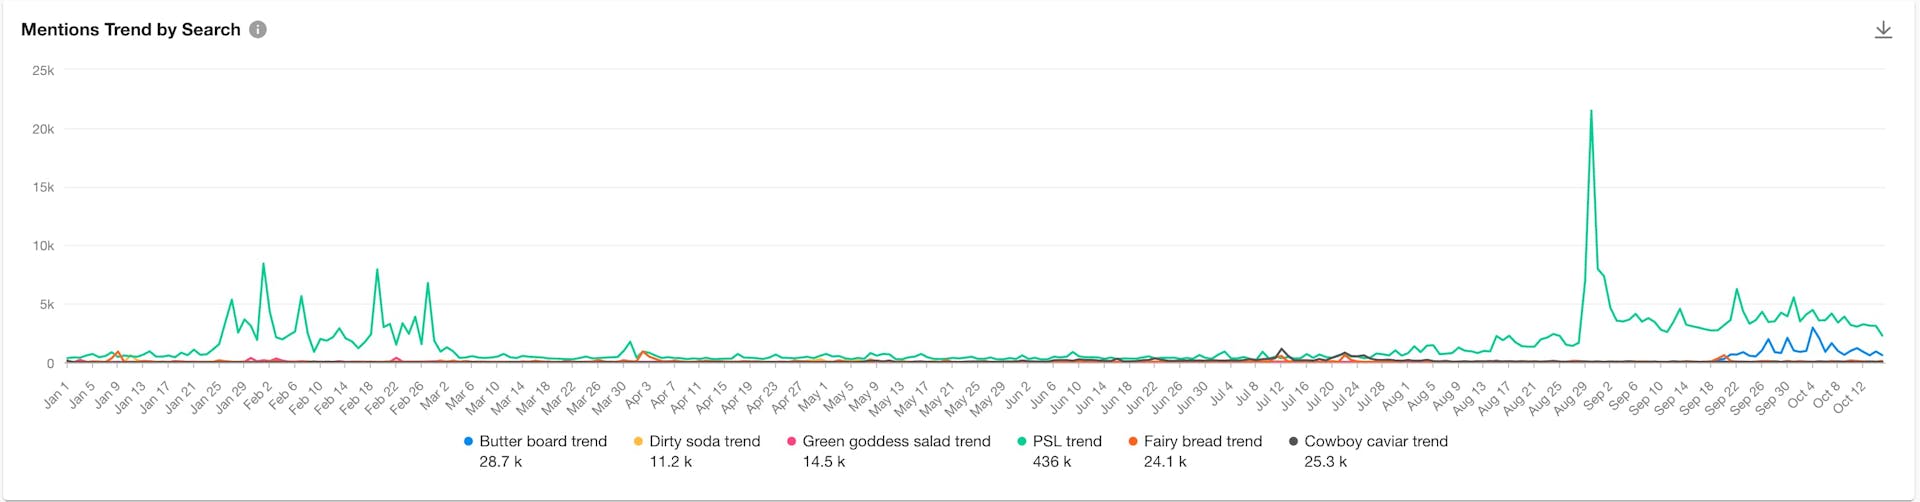 Screenshot from the Meltwater social listening platform of a chart of mentions over time of six food trends.